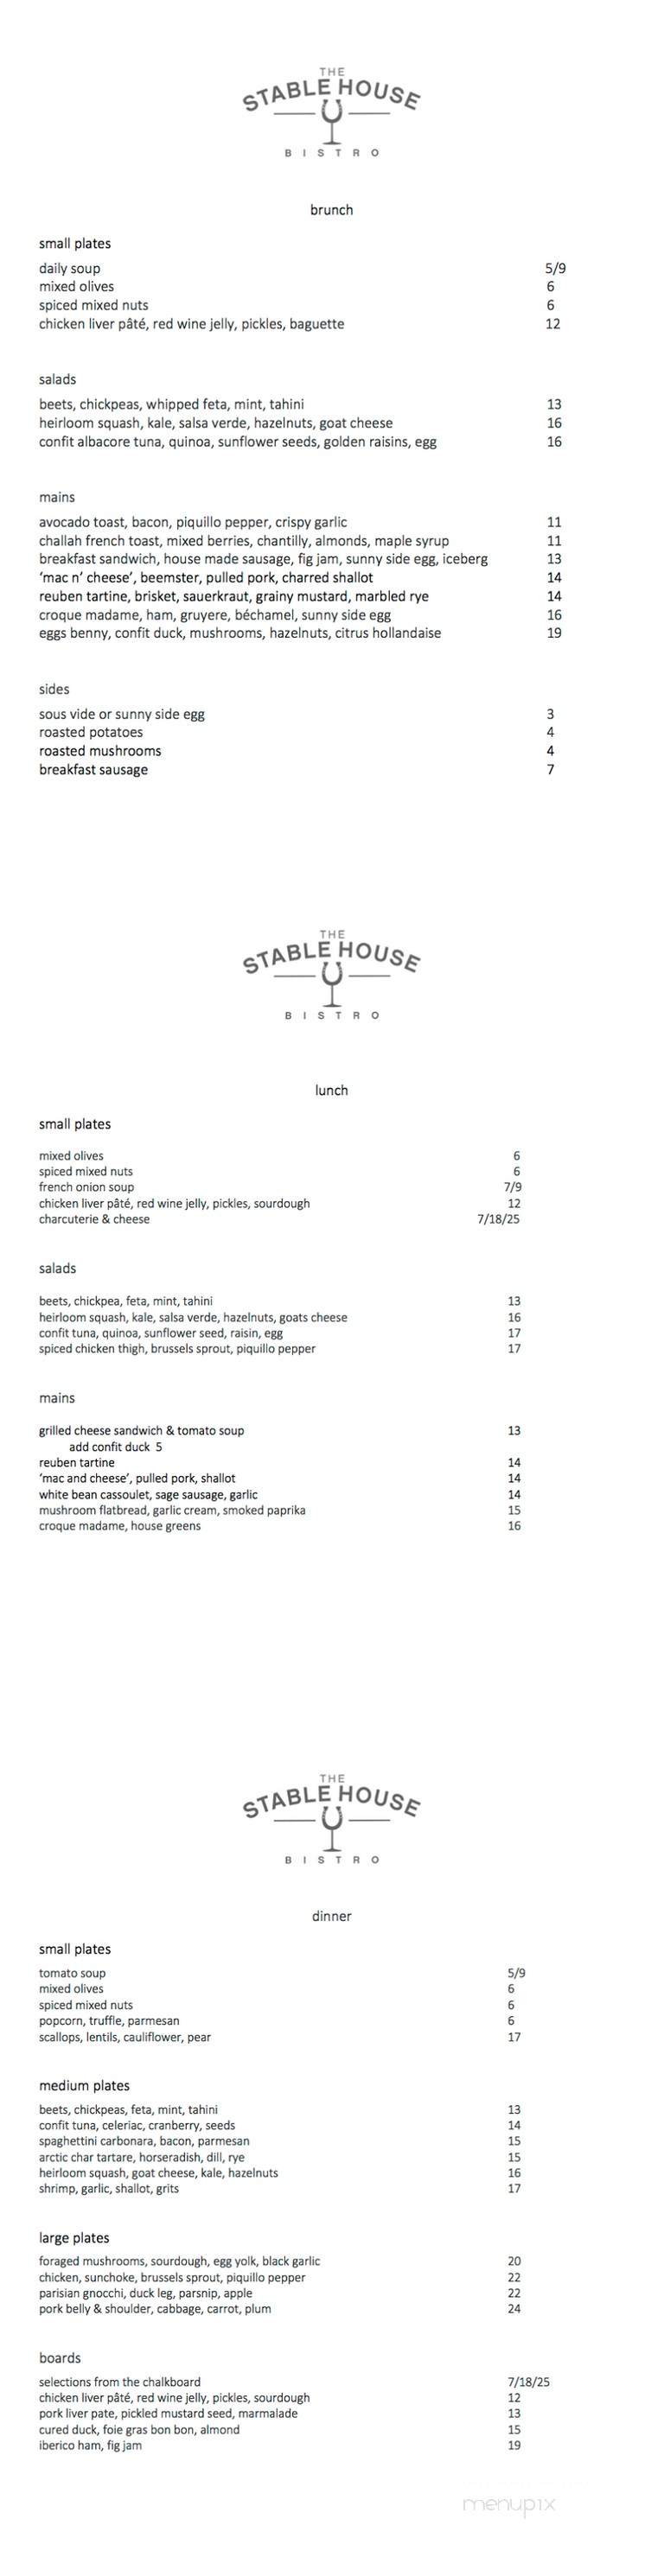 The Stable House Bistro - Vancouver, BC